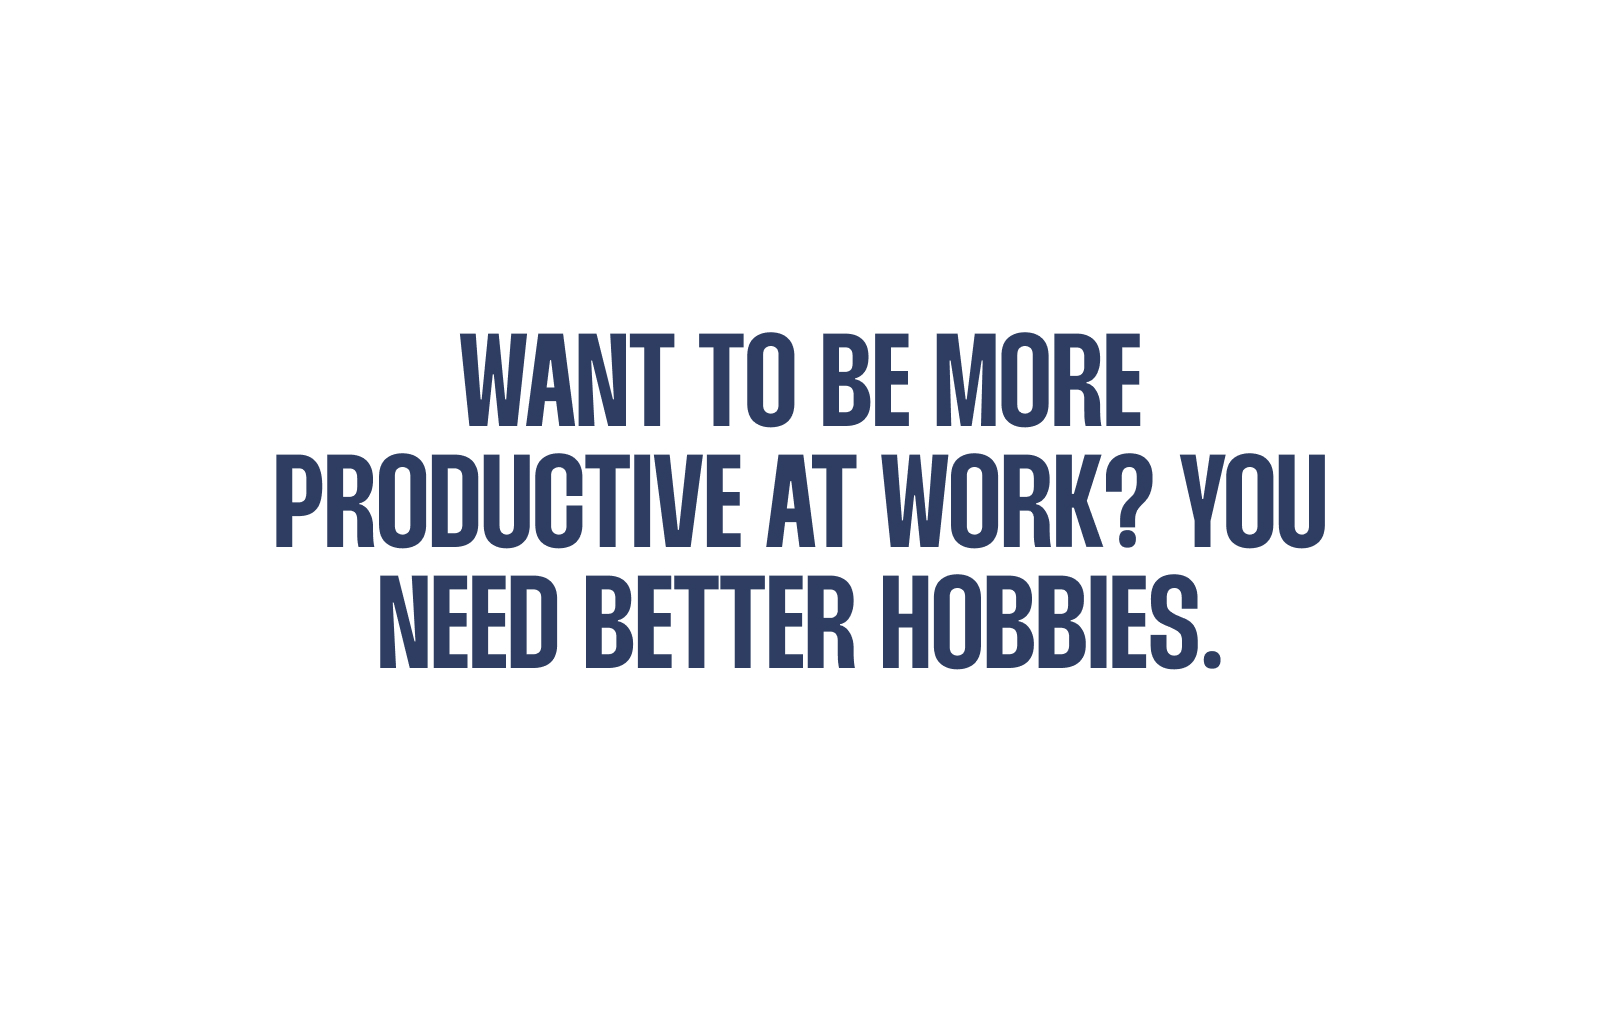 Want to Be More Productive at Work? You Need Better Hobbies.